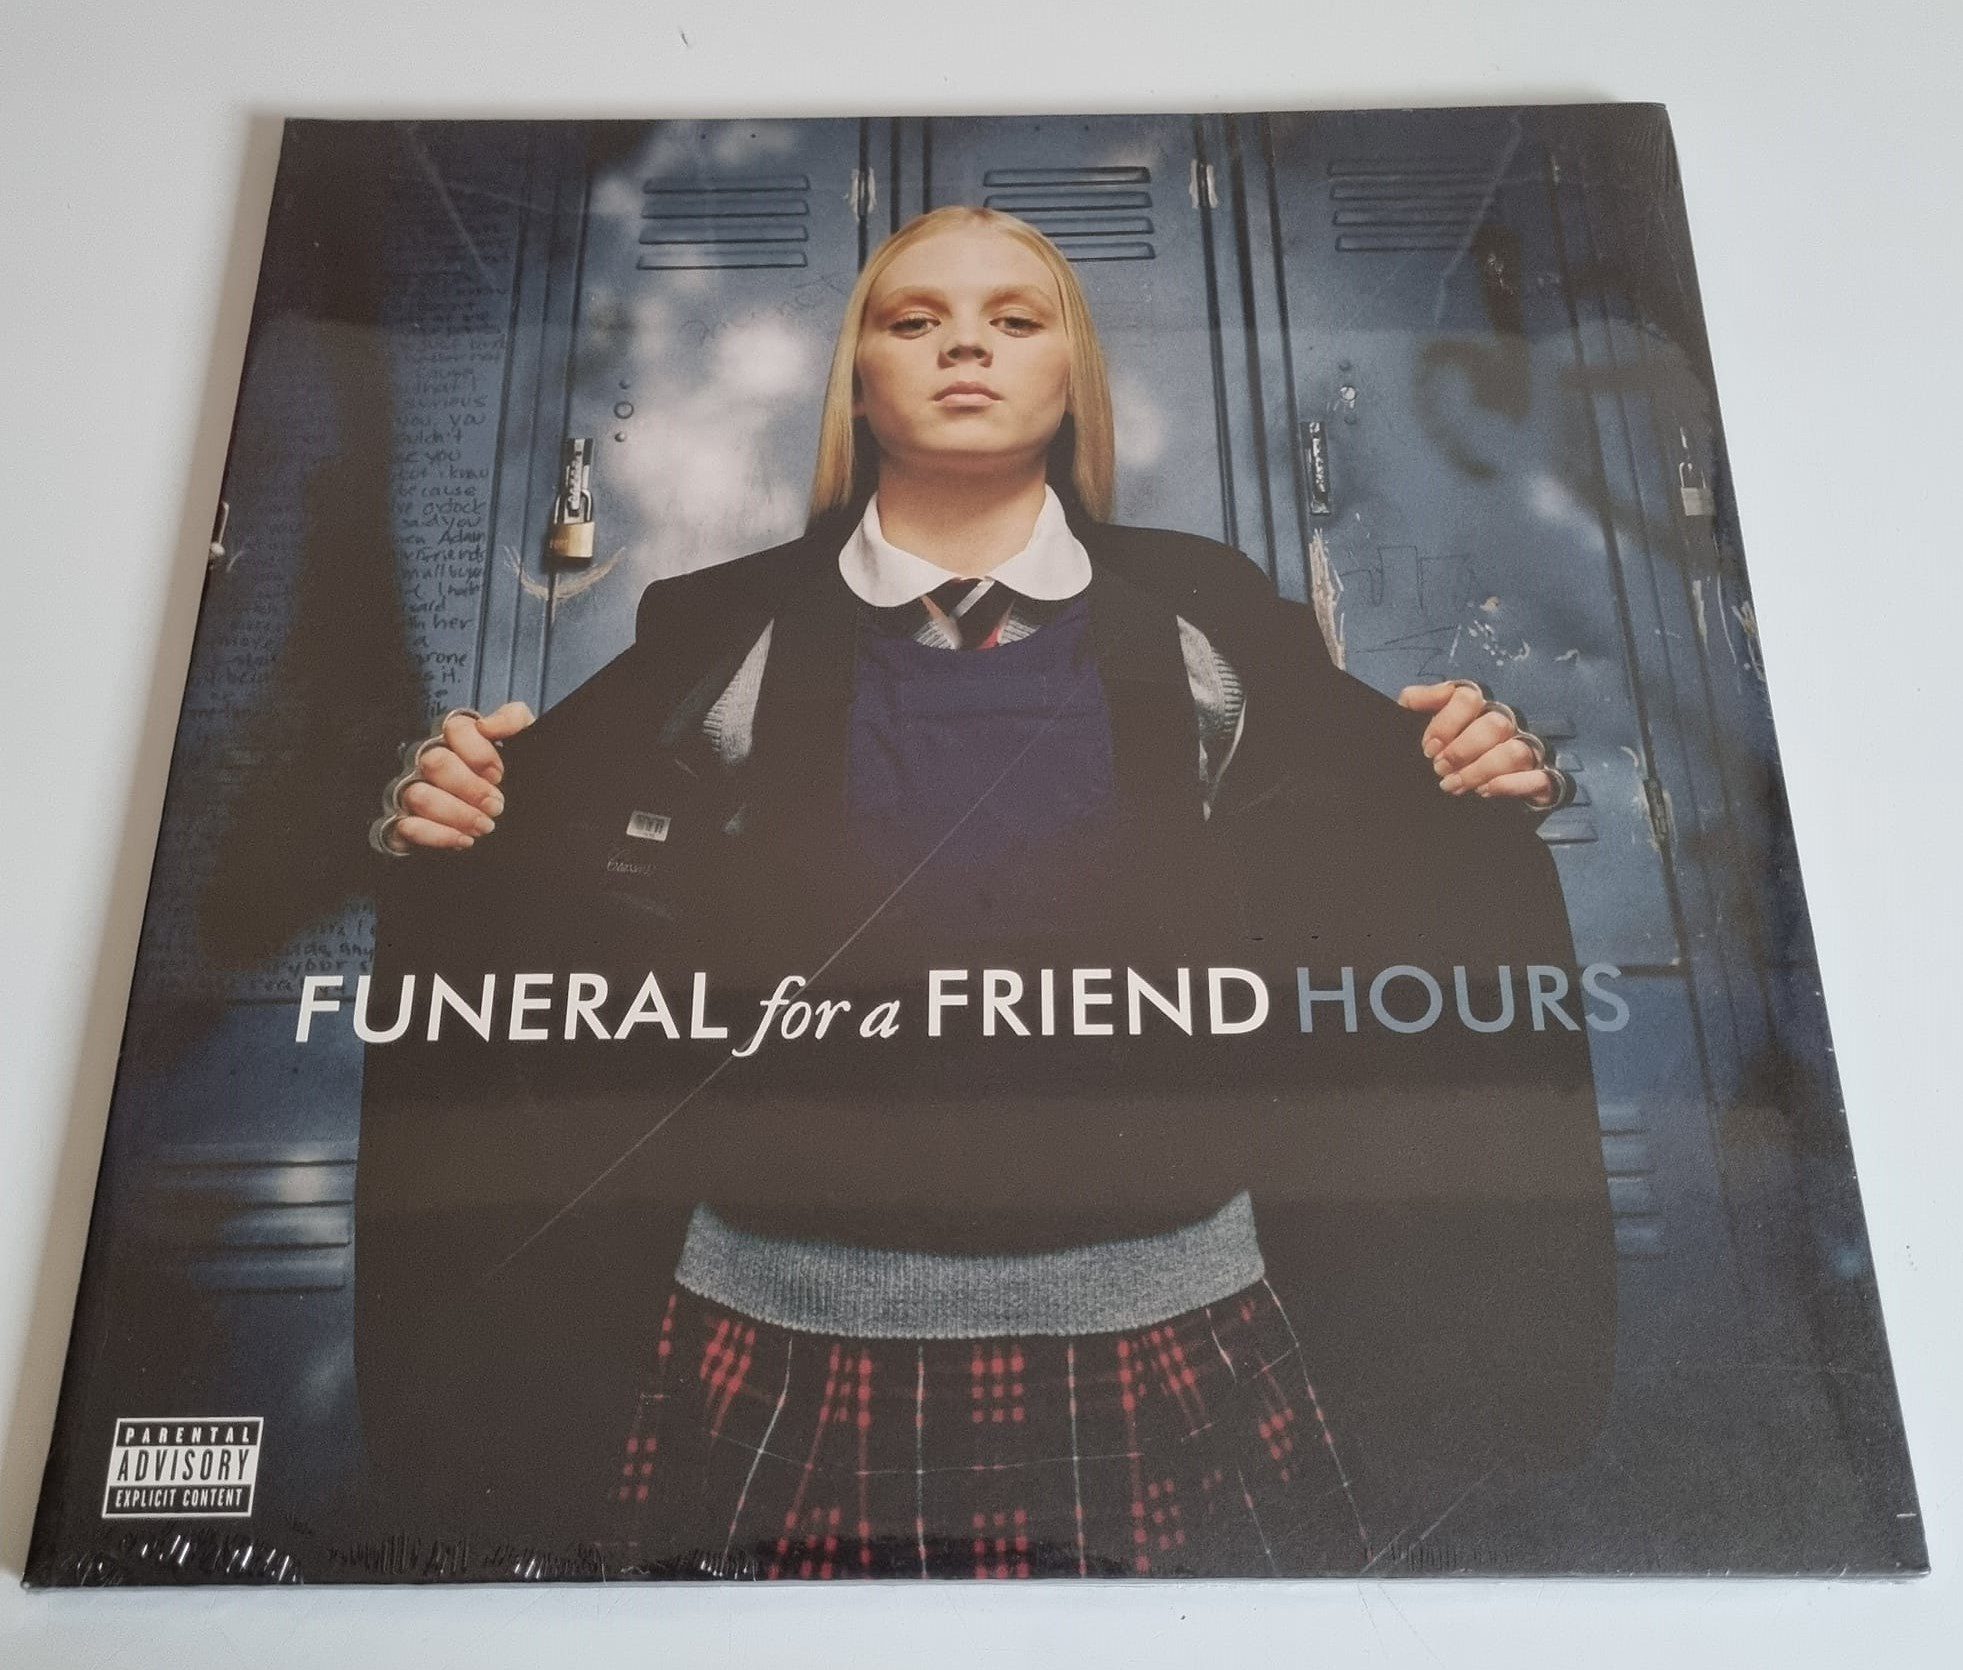 Buy this rare Funeral For A Friend record by clicking here